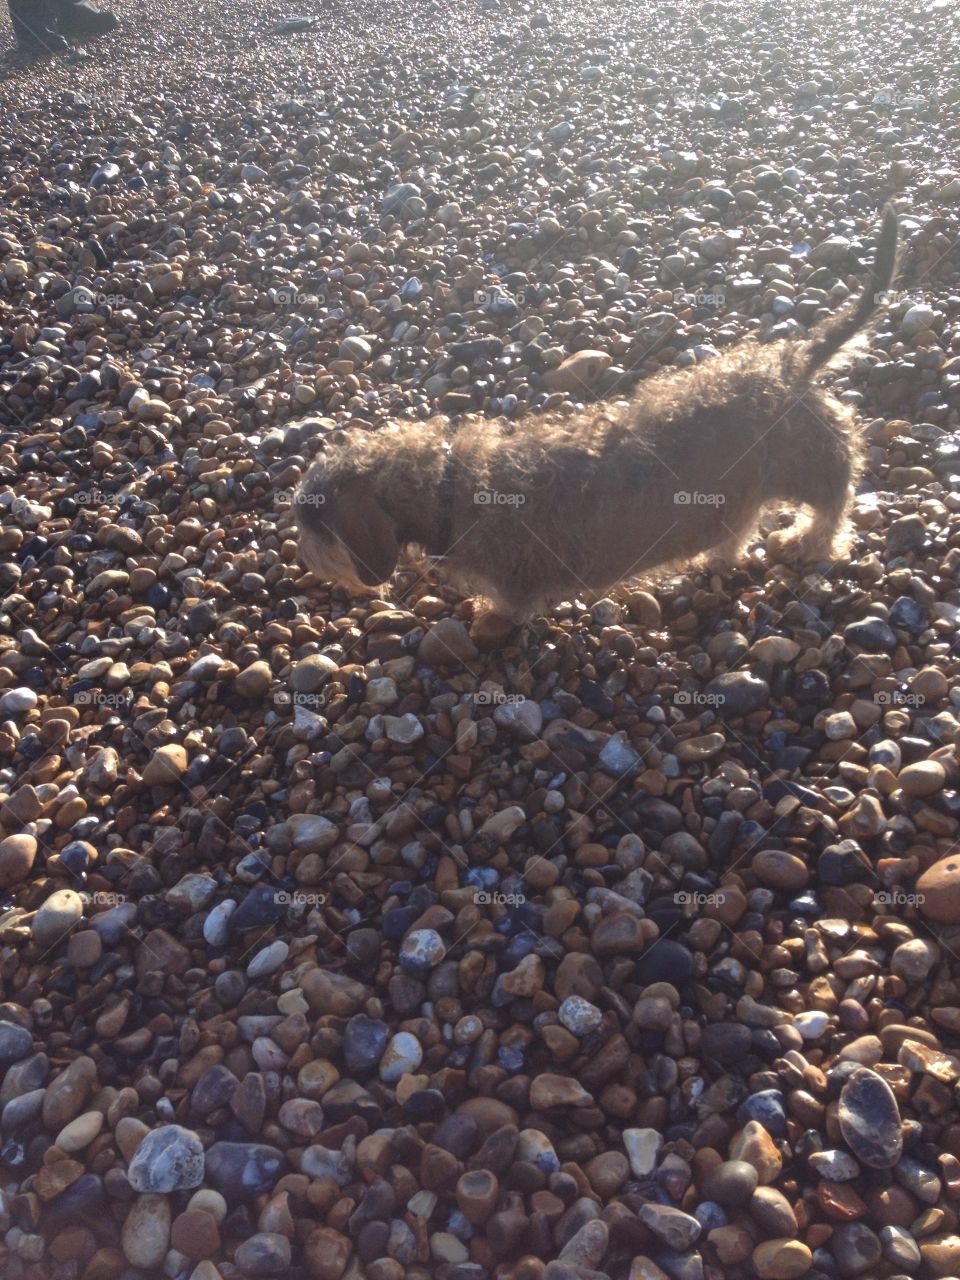 Another photo of adorable dog Rocky walking on a stoney beach